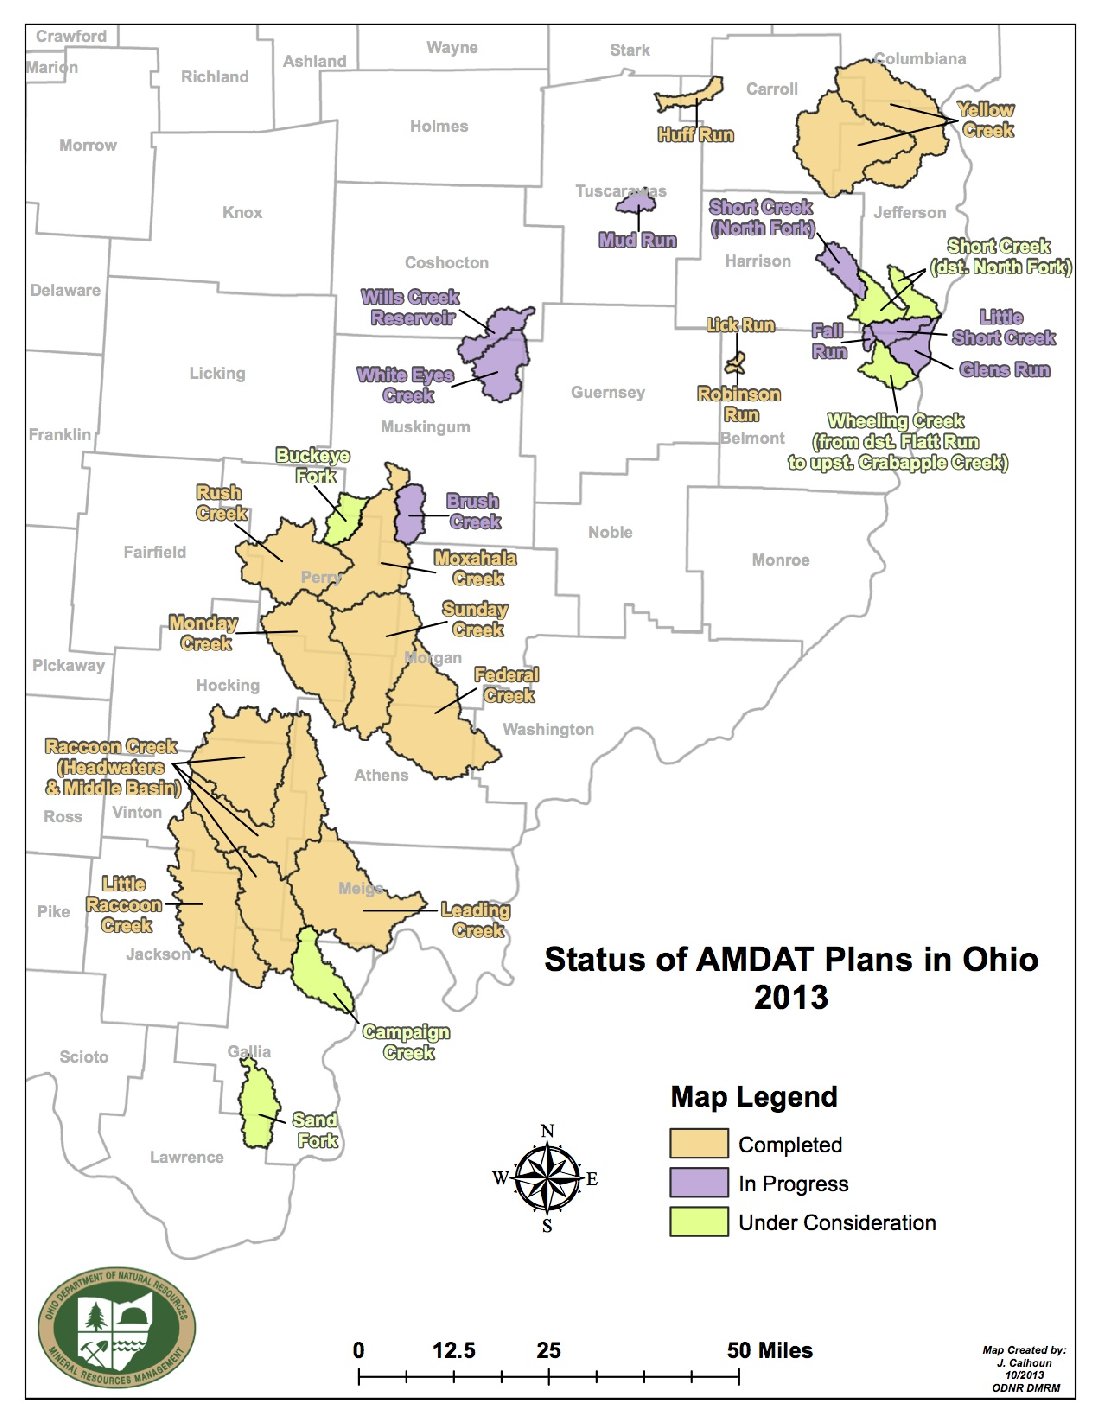 To date, the Ohio Department of Natural Resources has partnered with watershed groups to complete 55 AMD projects. Credit: Ohio Department of Natural Resources